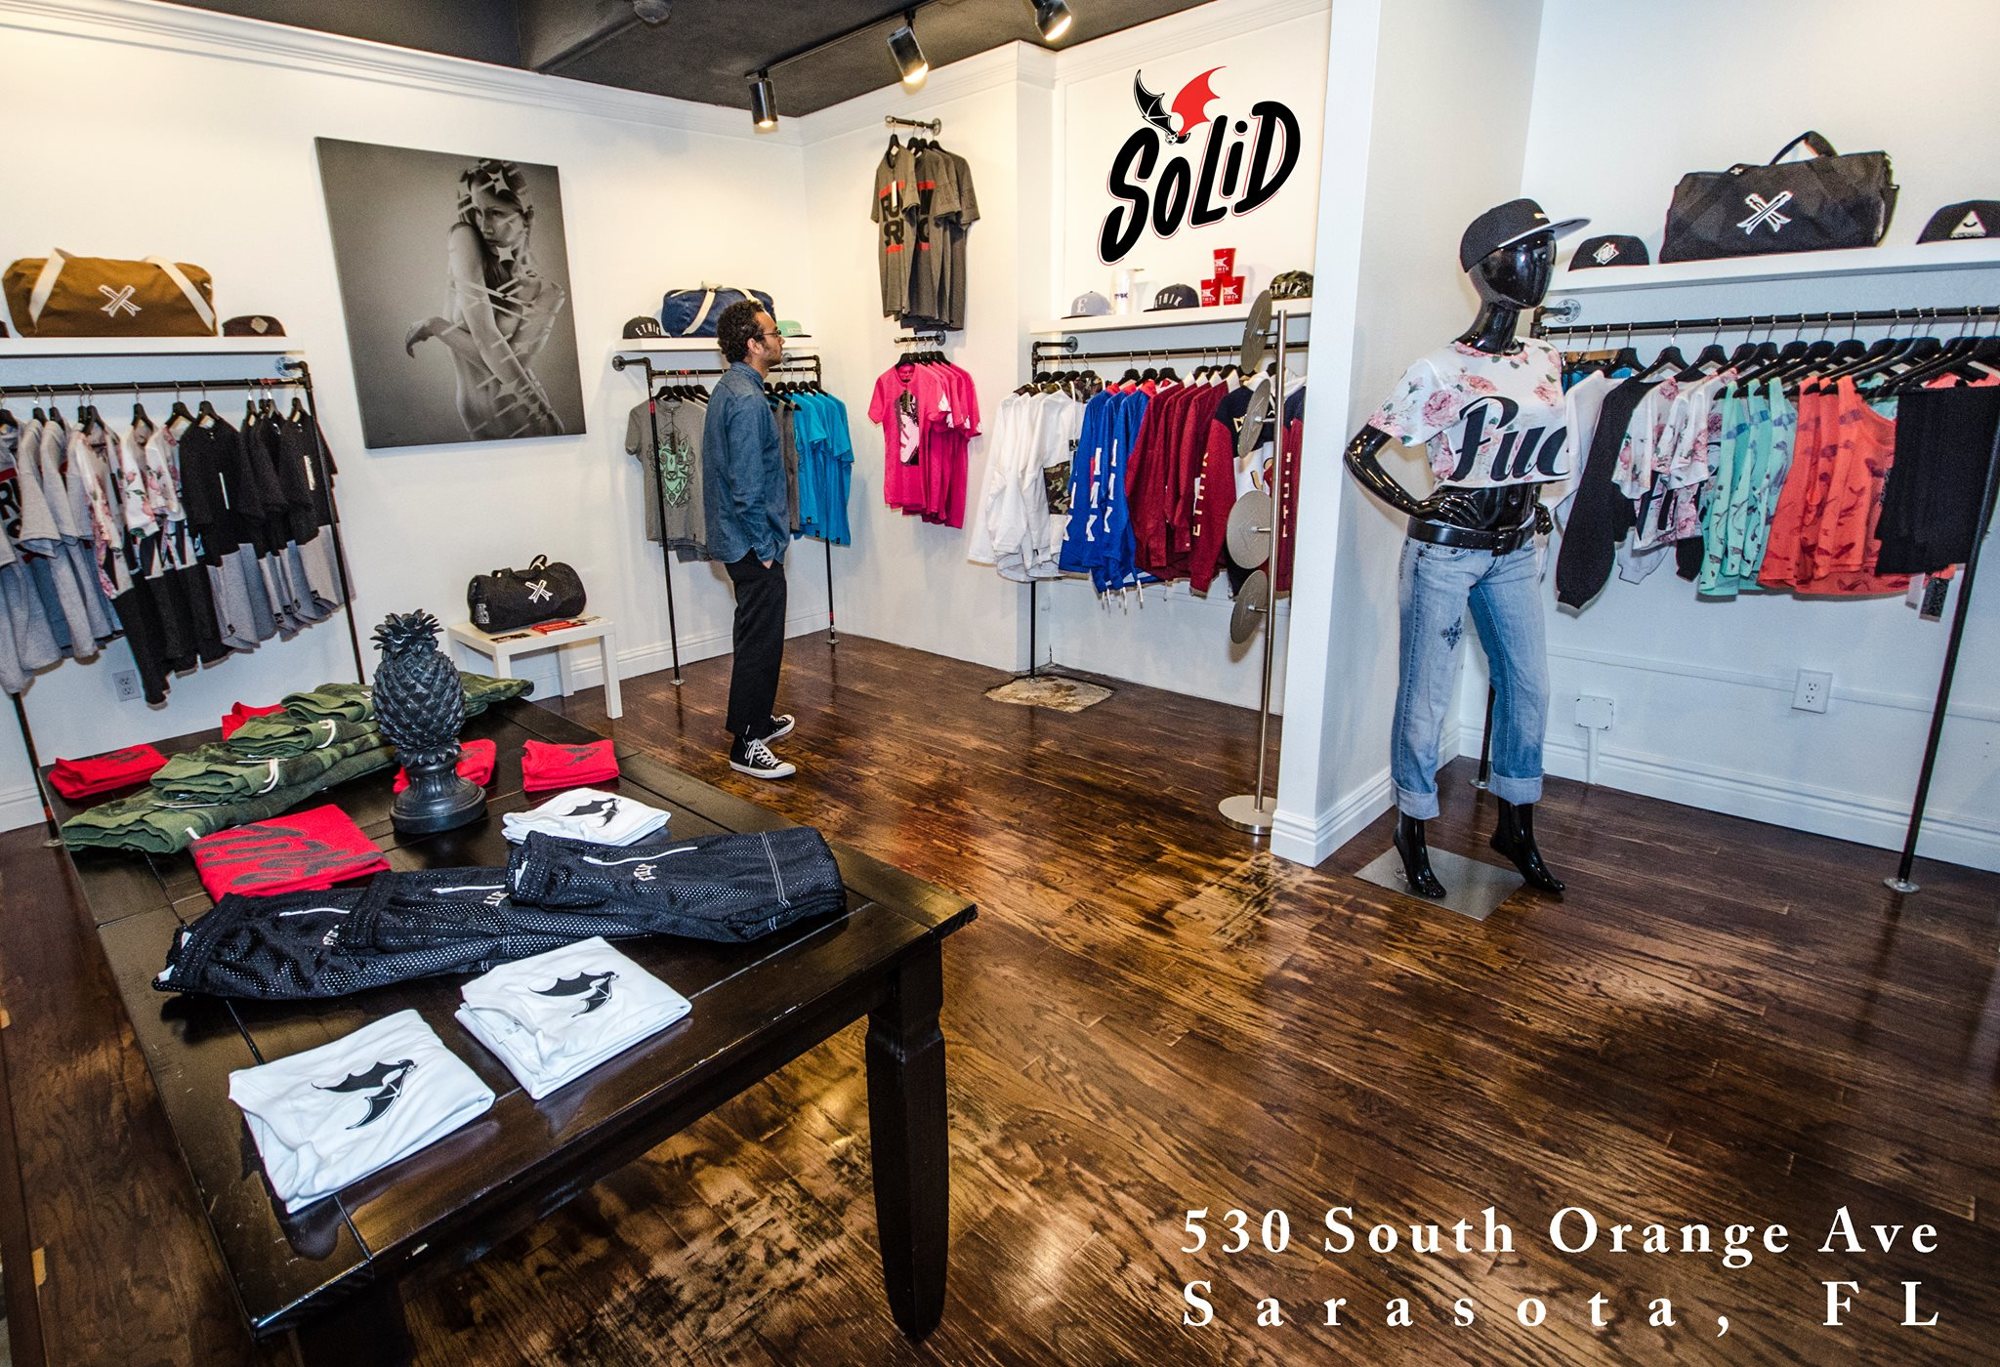 SOLID opened this weekend at 530 S. Orange Ave.